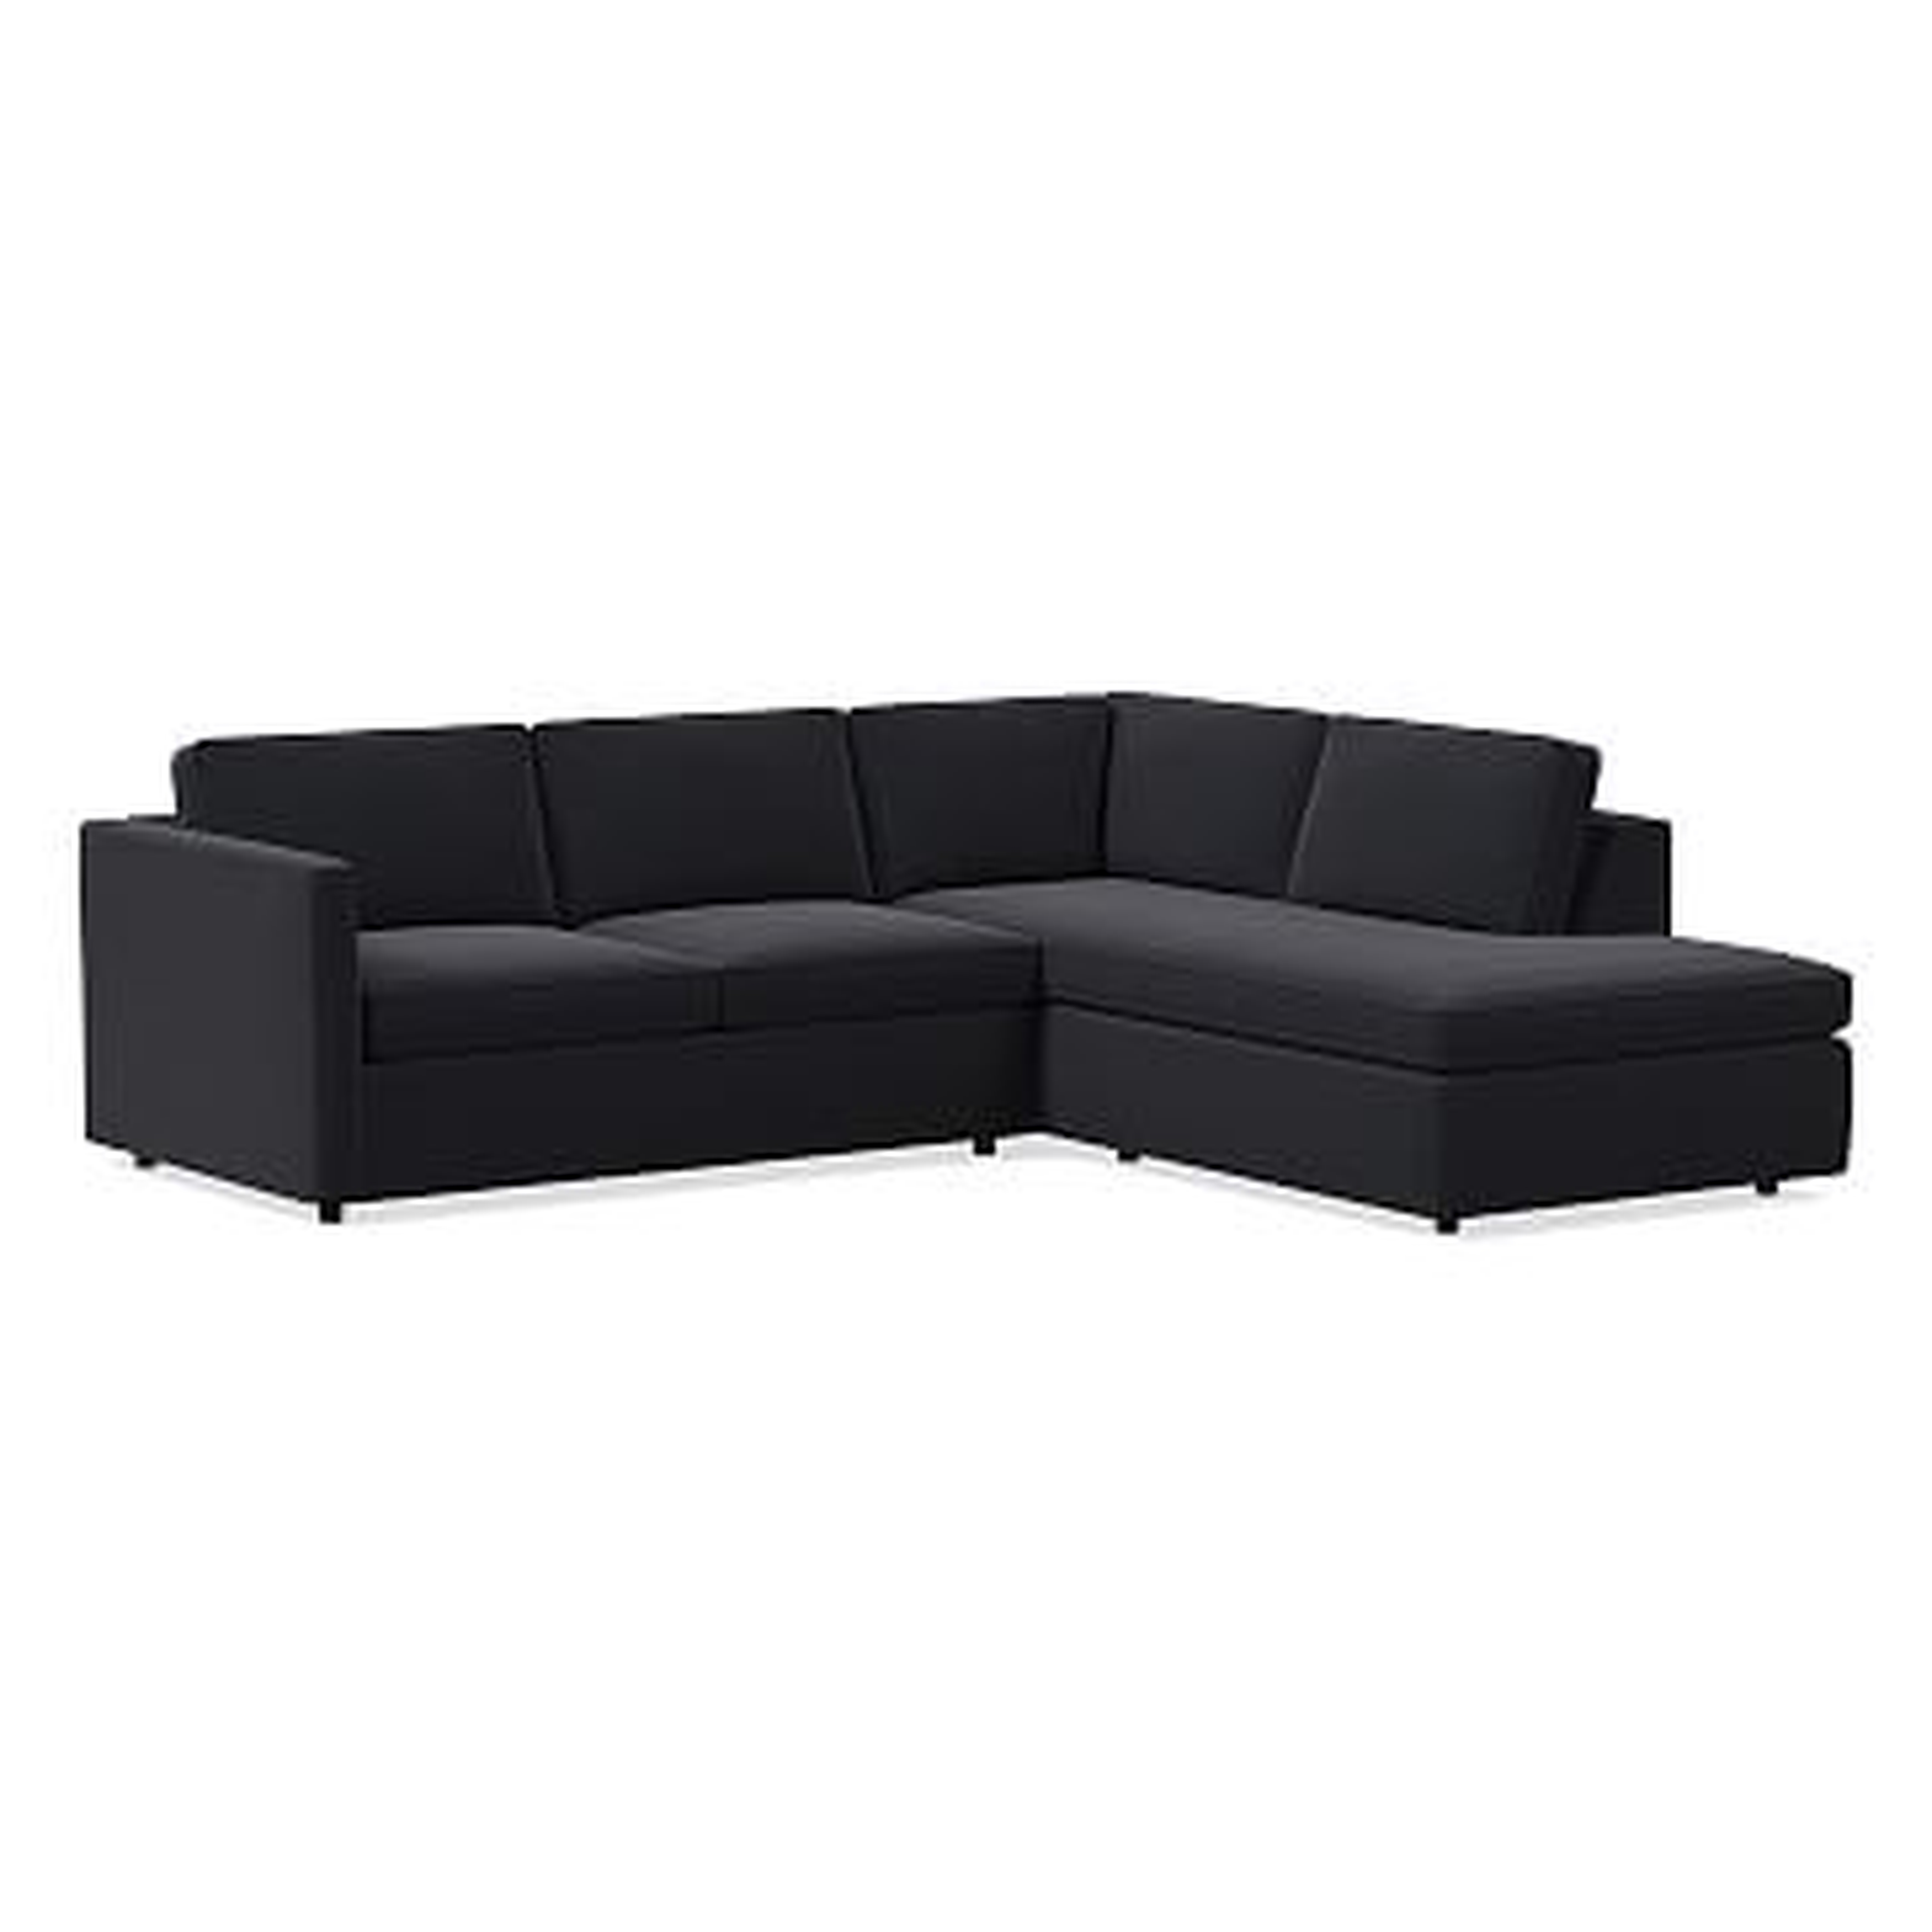 Harris Sectional Set 09: LA 65" Sofa, RA Terminal Chaise, Poly , Performance Velvet, Black, Concealed Supports - West Elm